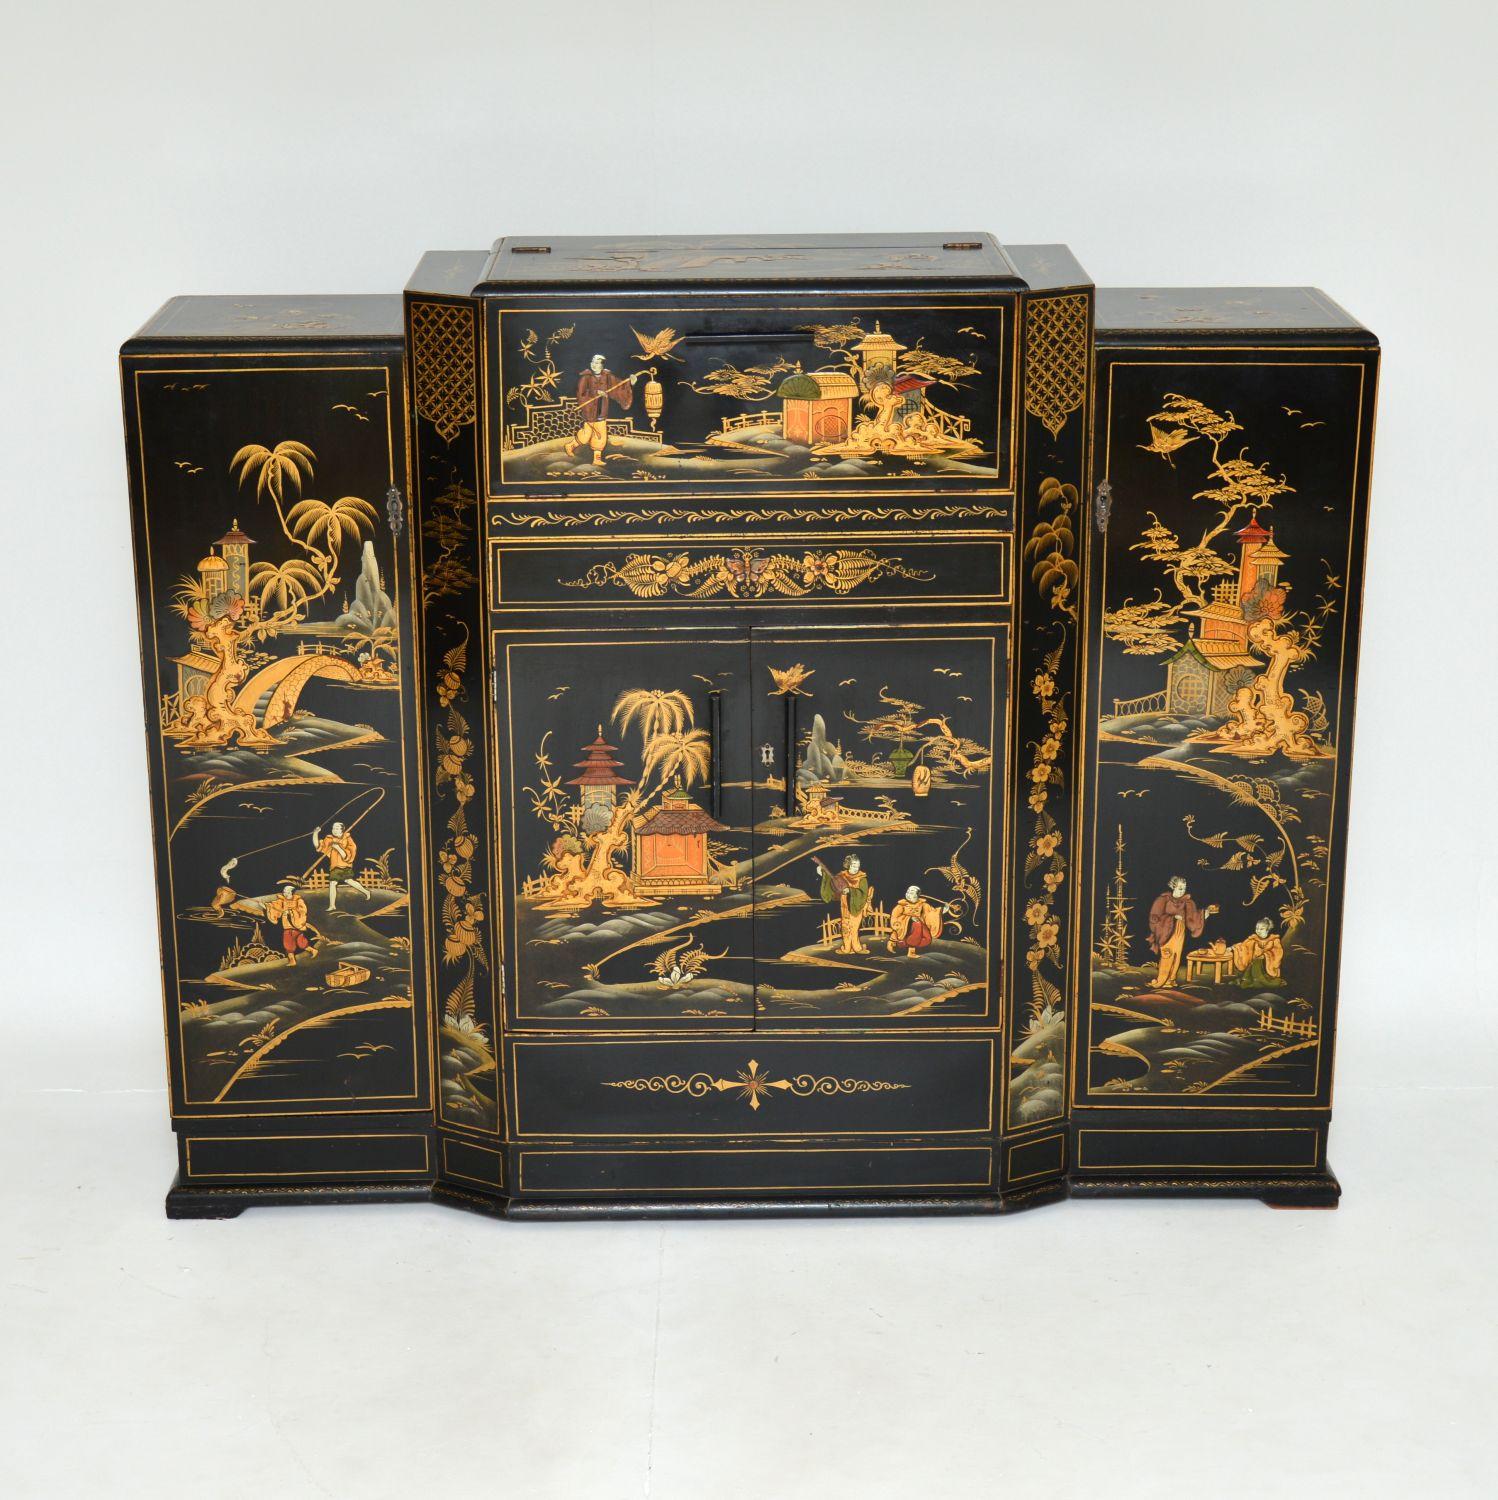 A spectacular original Art Deco period lacquered chinoiserie cocktail cabinet. This was made in England, it dates from the 1930’s.

It is beautifully made and exquisitely decorated in profuse oriental style lacquered chinoiserie. The detail is